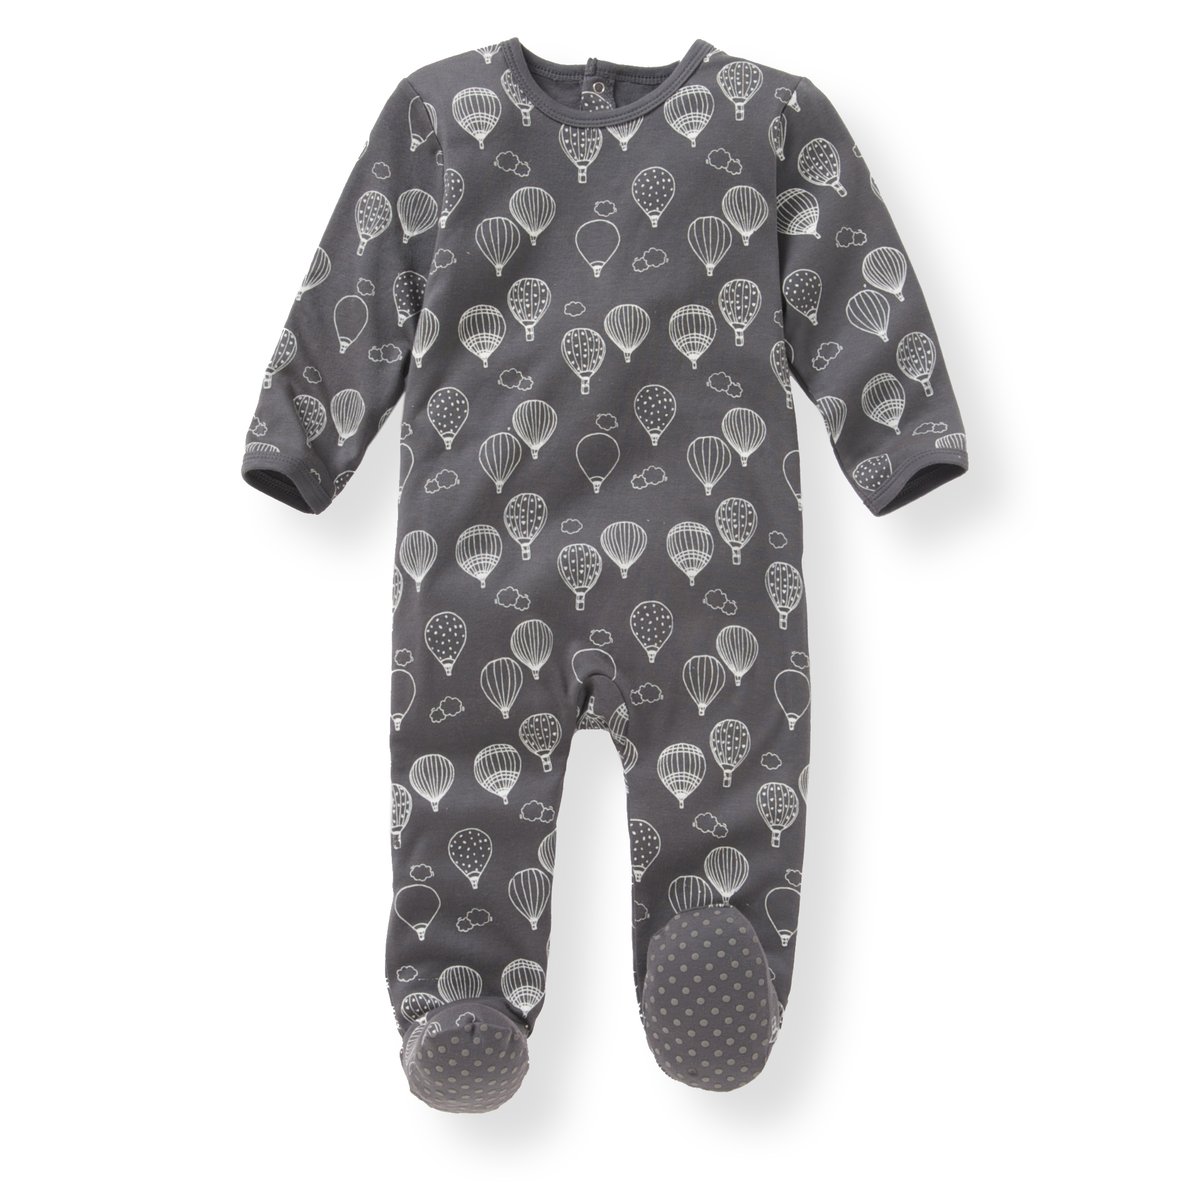 La Redoute Collections Baby Boys Pack Of 3 Printed Cotton Sleepsuits, Birth-3 Years